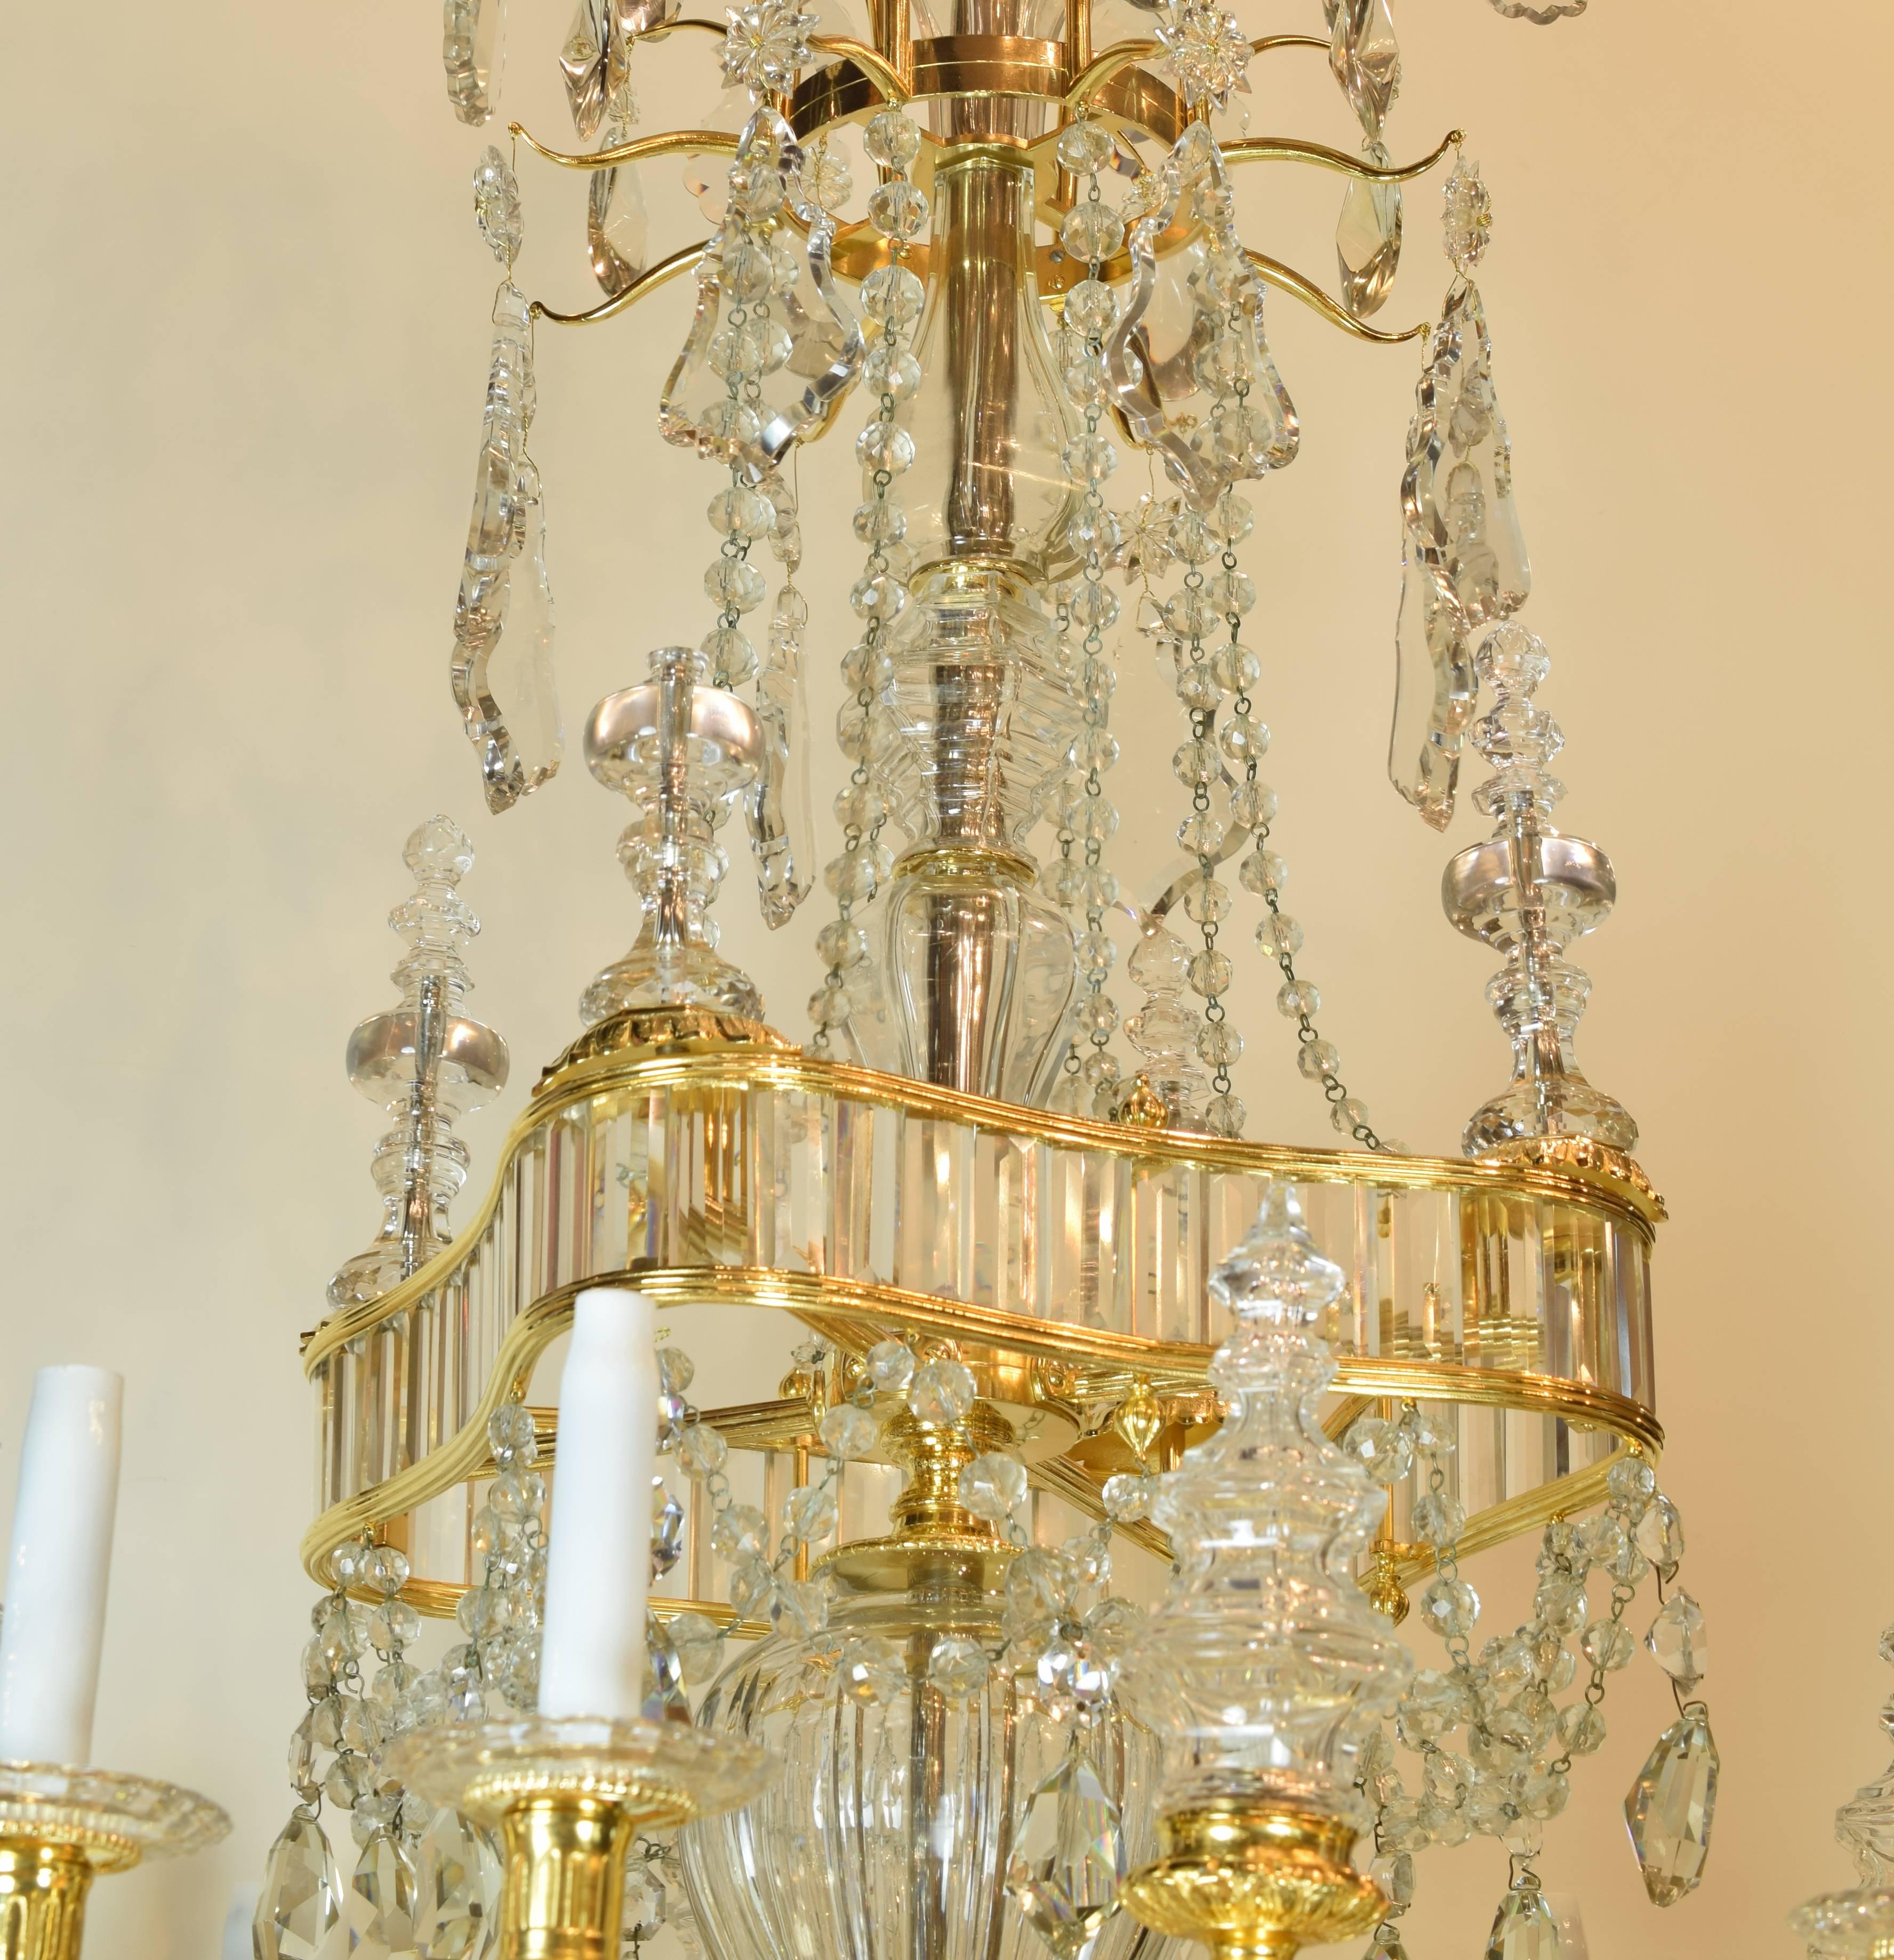 Louis XVI Gilt Bronze and Baccarat Glass Chandelier, France, 19th Century